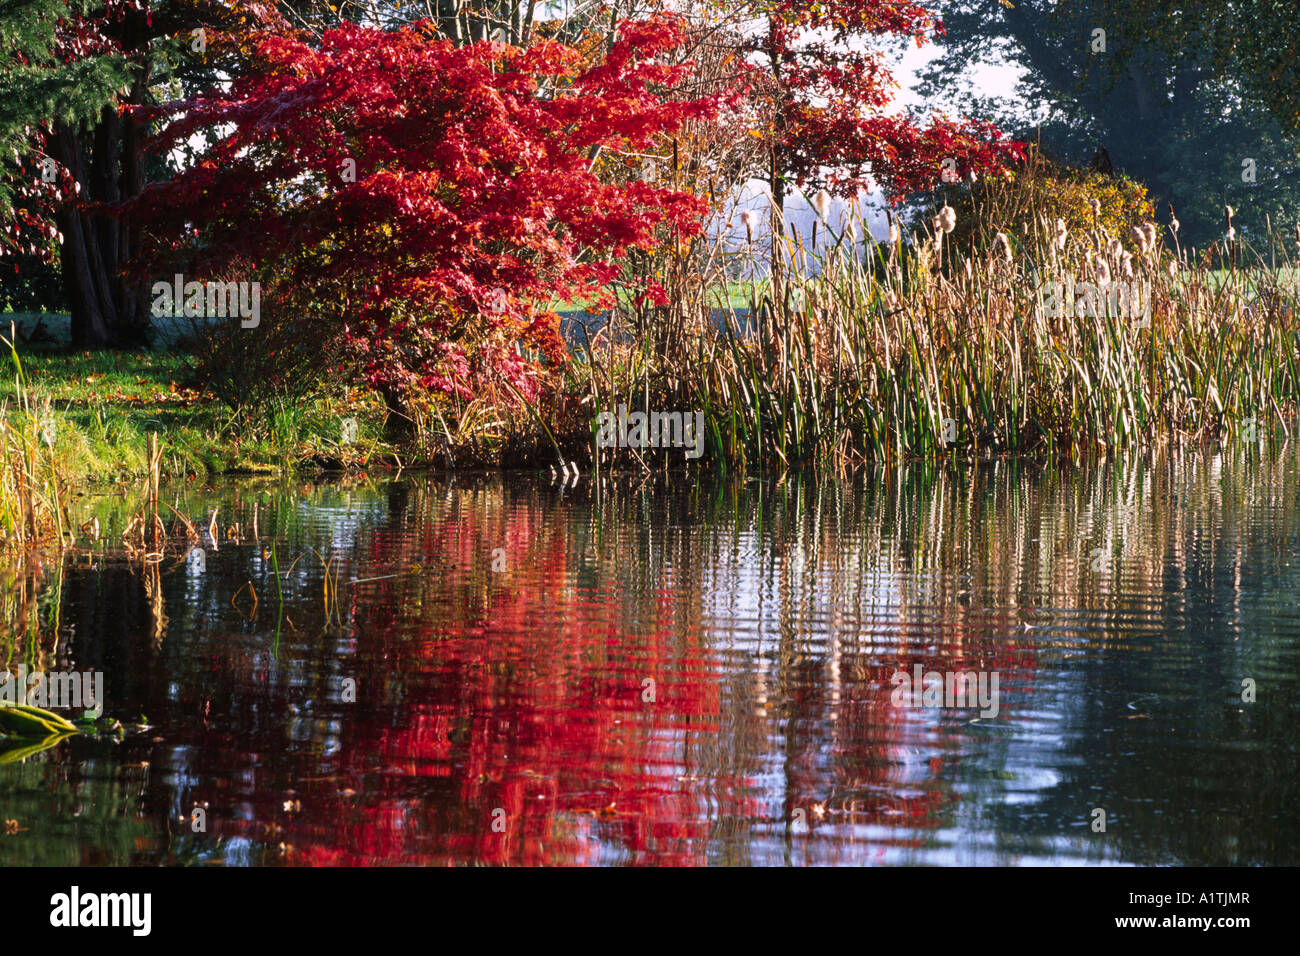 An Autumn Maple reflecting ina garden lake with Bulrushes. Glansevern Gardens, Powys, Wales, UK. Stock Photo